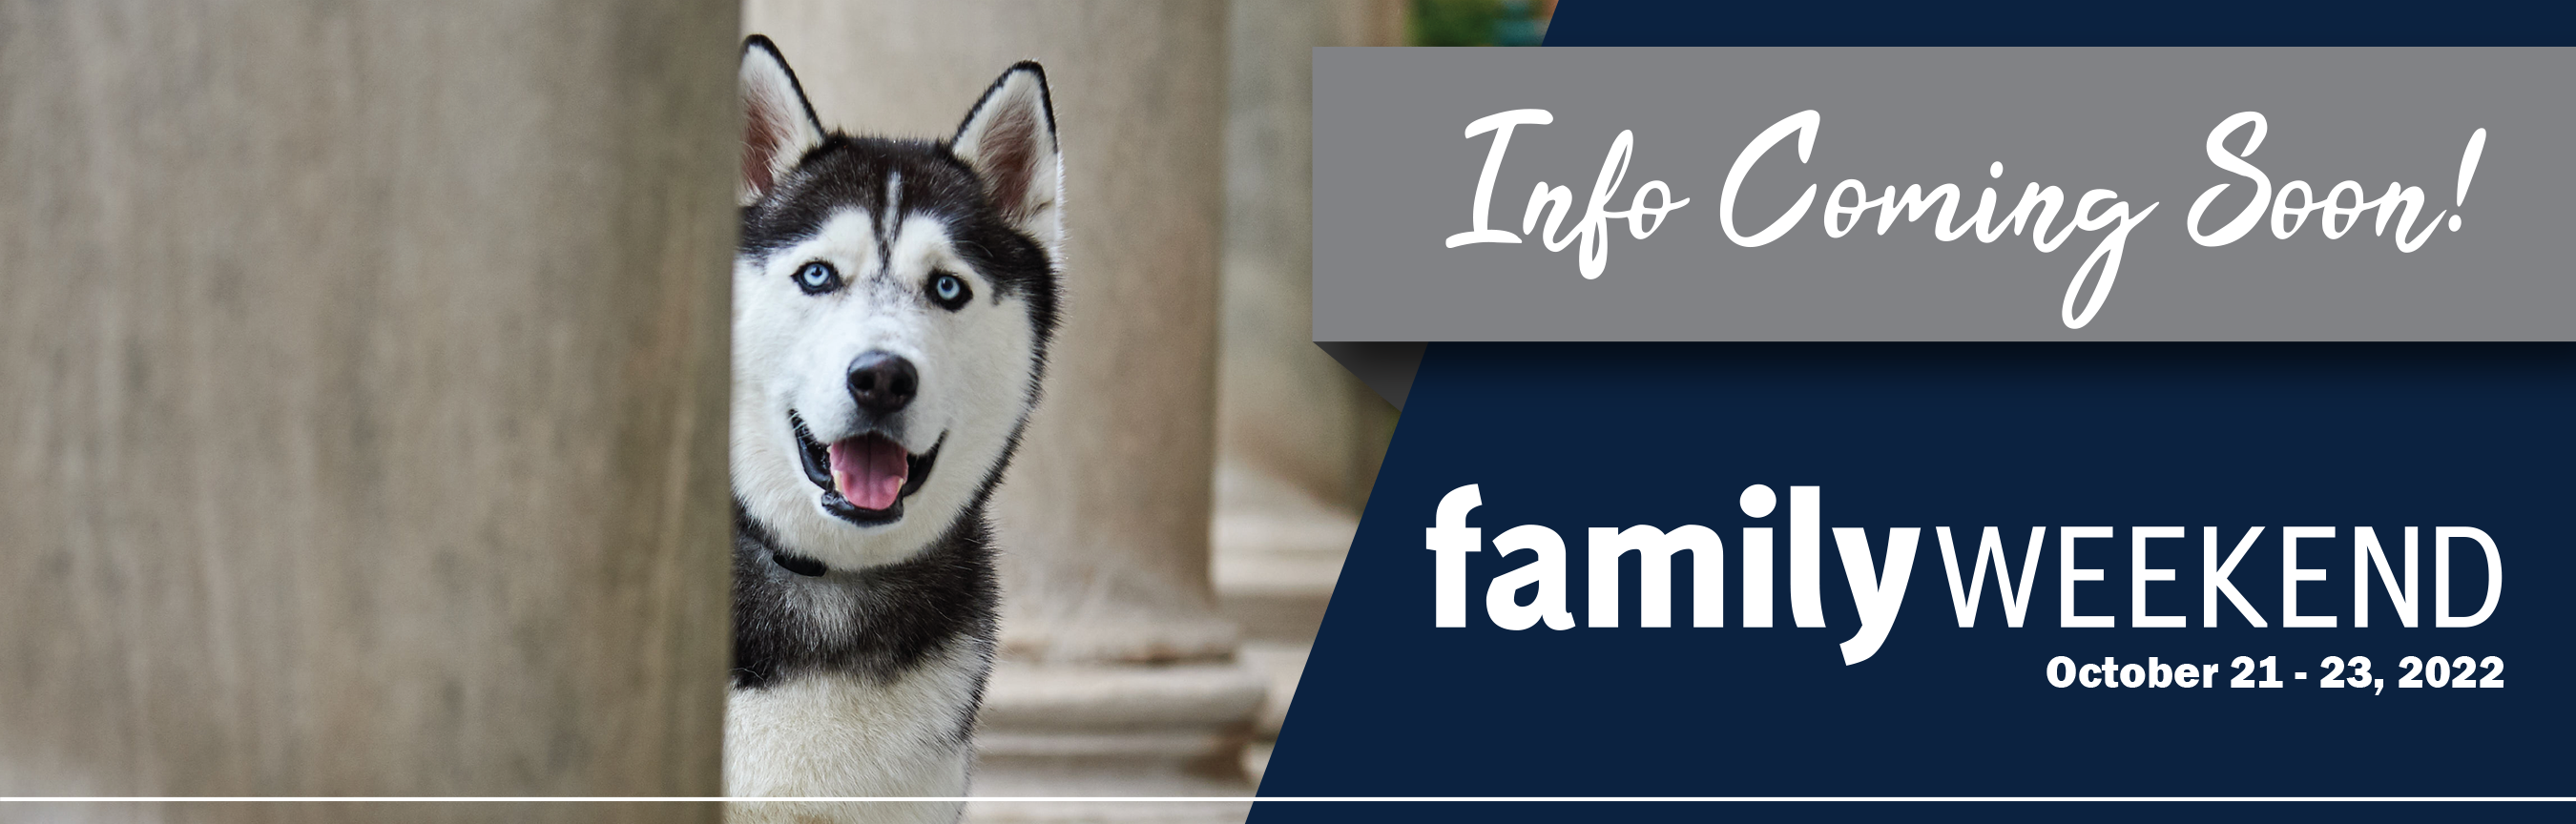 family weekend 2022 save the date coming soon web banner